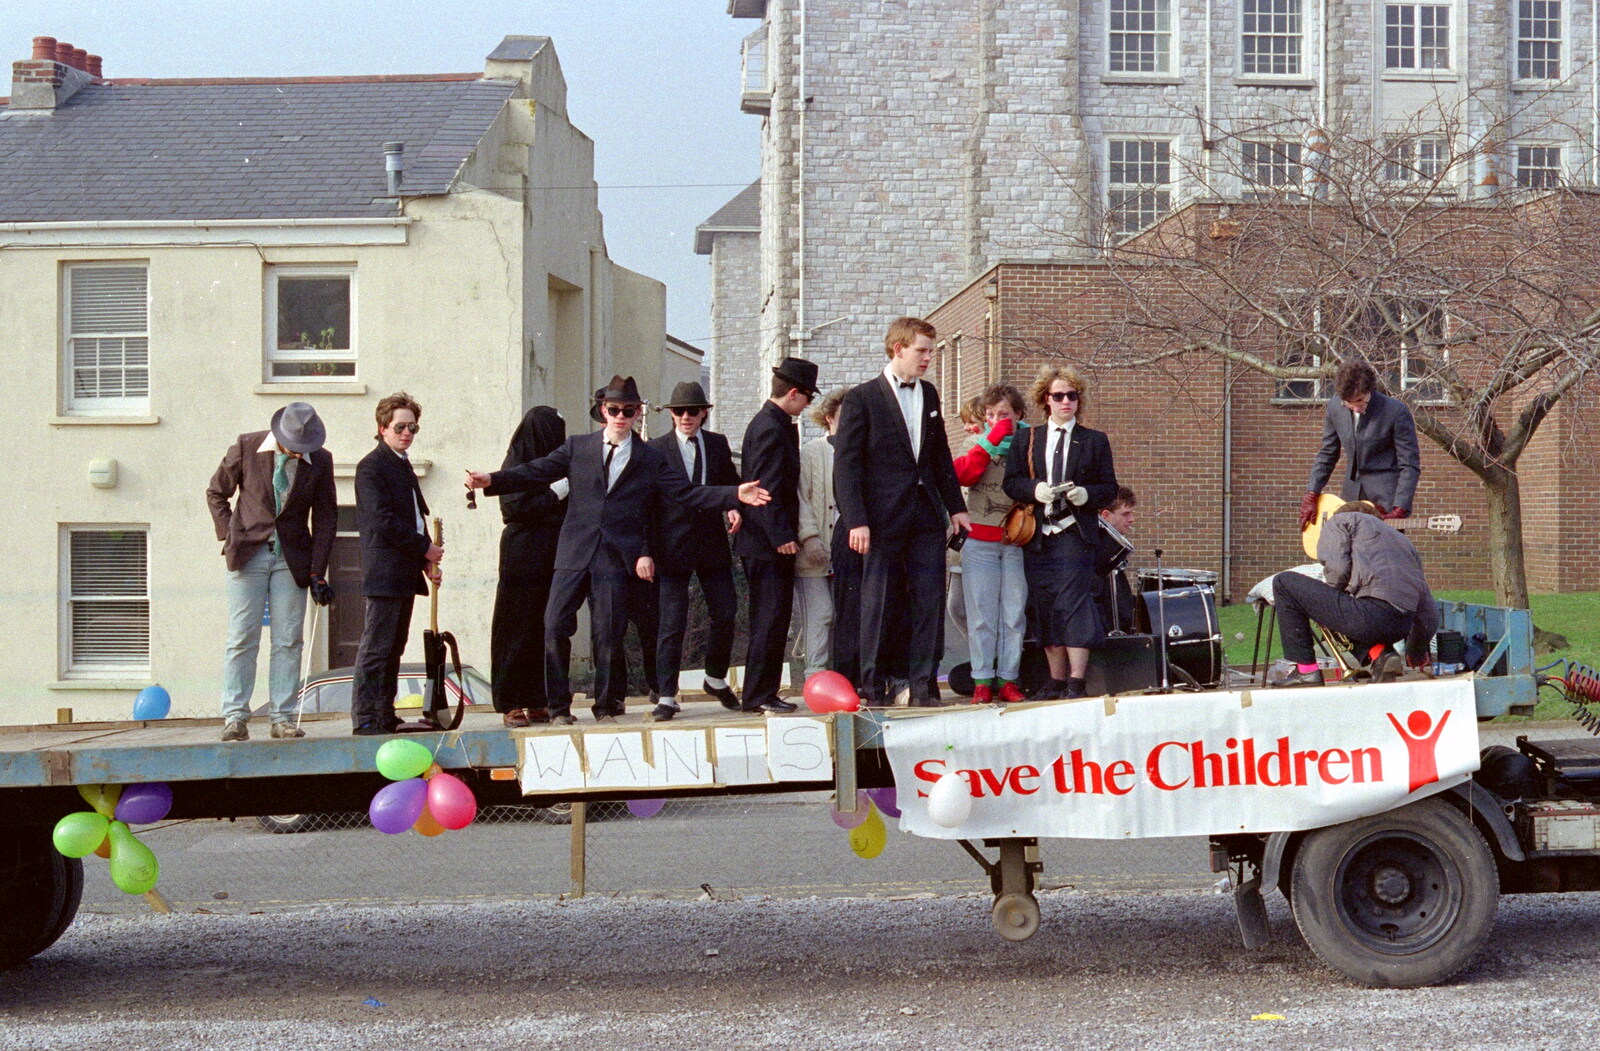 The Blues Brothers by the Coburg Street Villas from Uni: PPSU "Jazz" RAG Street Parade, Plymouth, Devon - 17th February 1986